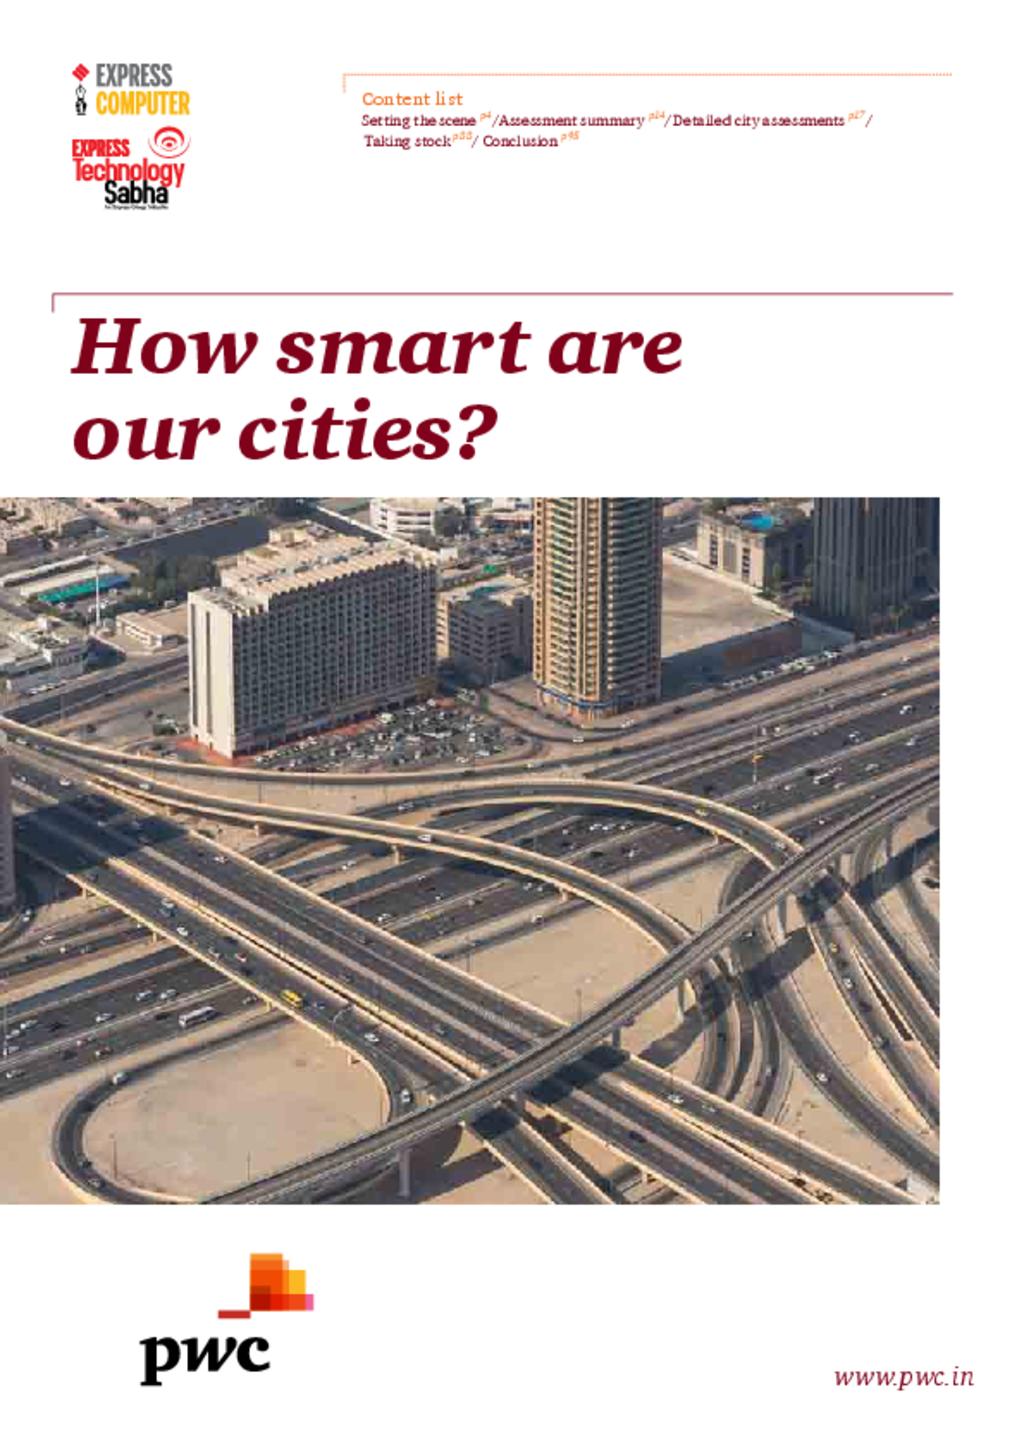 How smart are our cities?